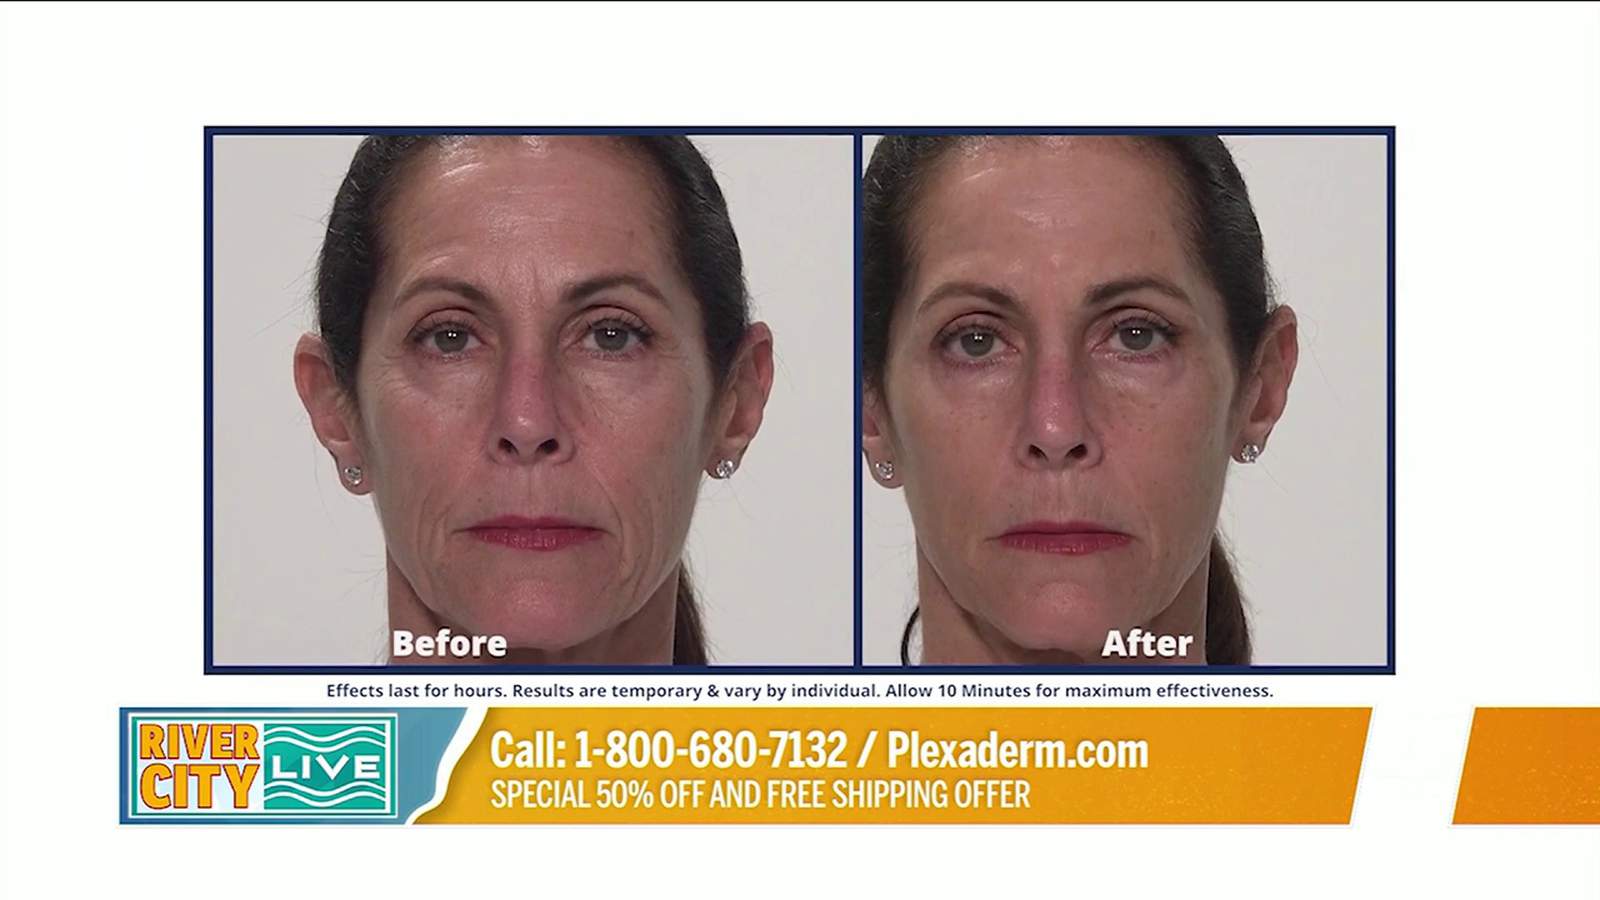 Get Rid of Under-Eye Bags with Plexaderm | River City Live